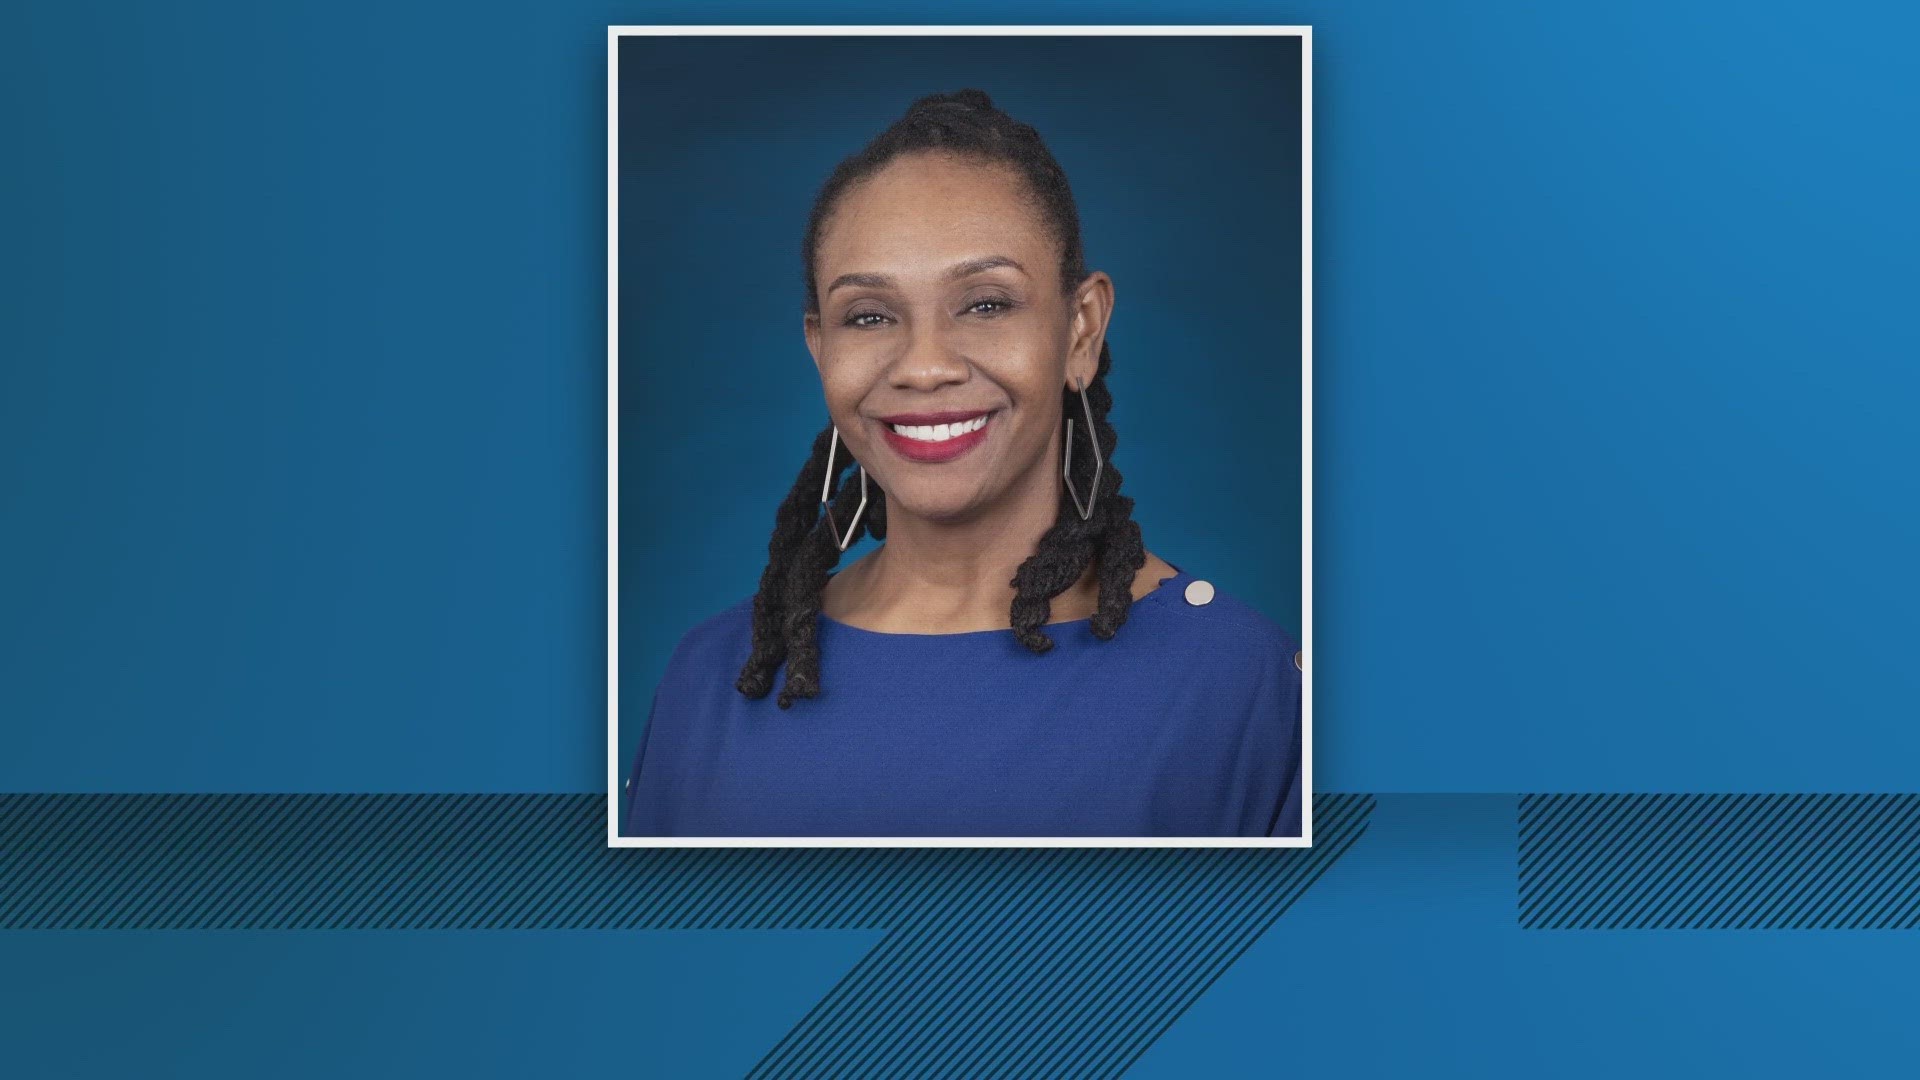 The Jacksonville Housing Authority (JHA) appointed Vanessa Dunn as the agency's acting CEO for a 60-day period, according to a news release.